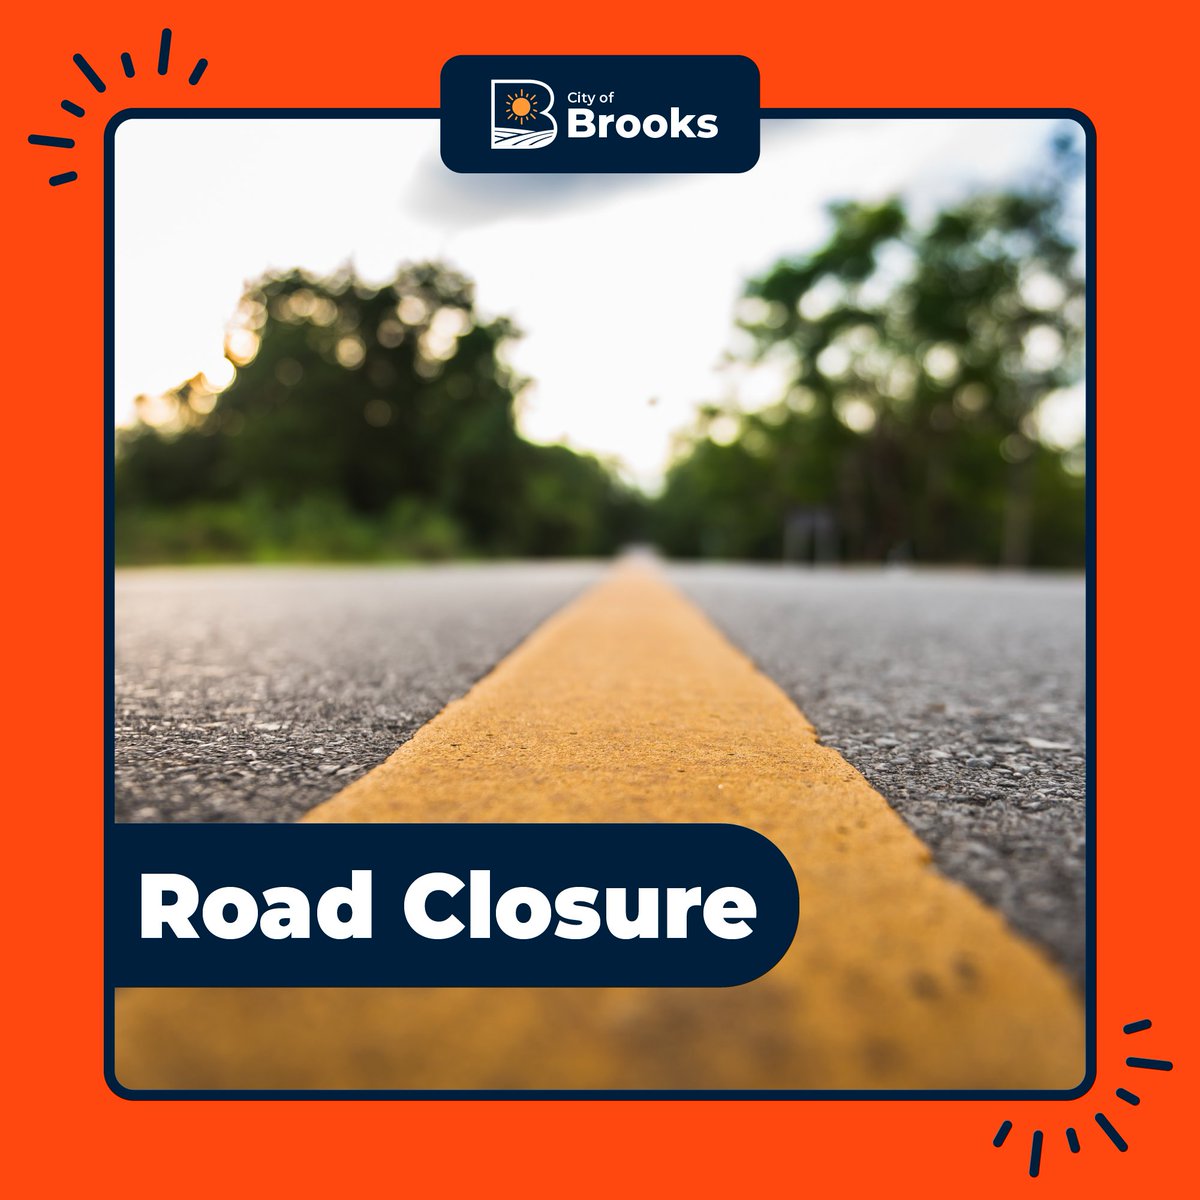 Due to a sewer line break, there will be a road closure from 8 to 24 Lake Newell Cres. We'll let you know when the work is completed!